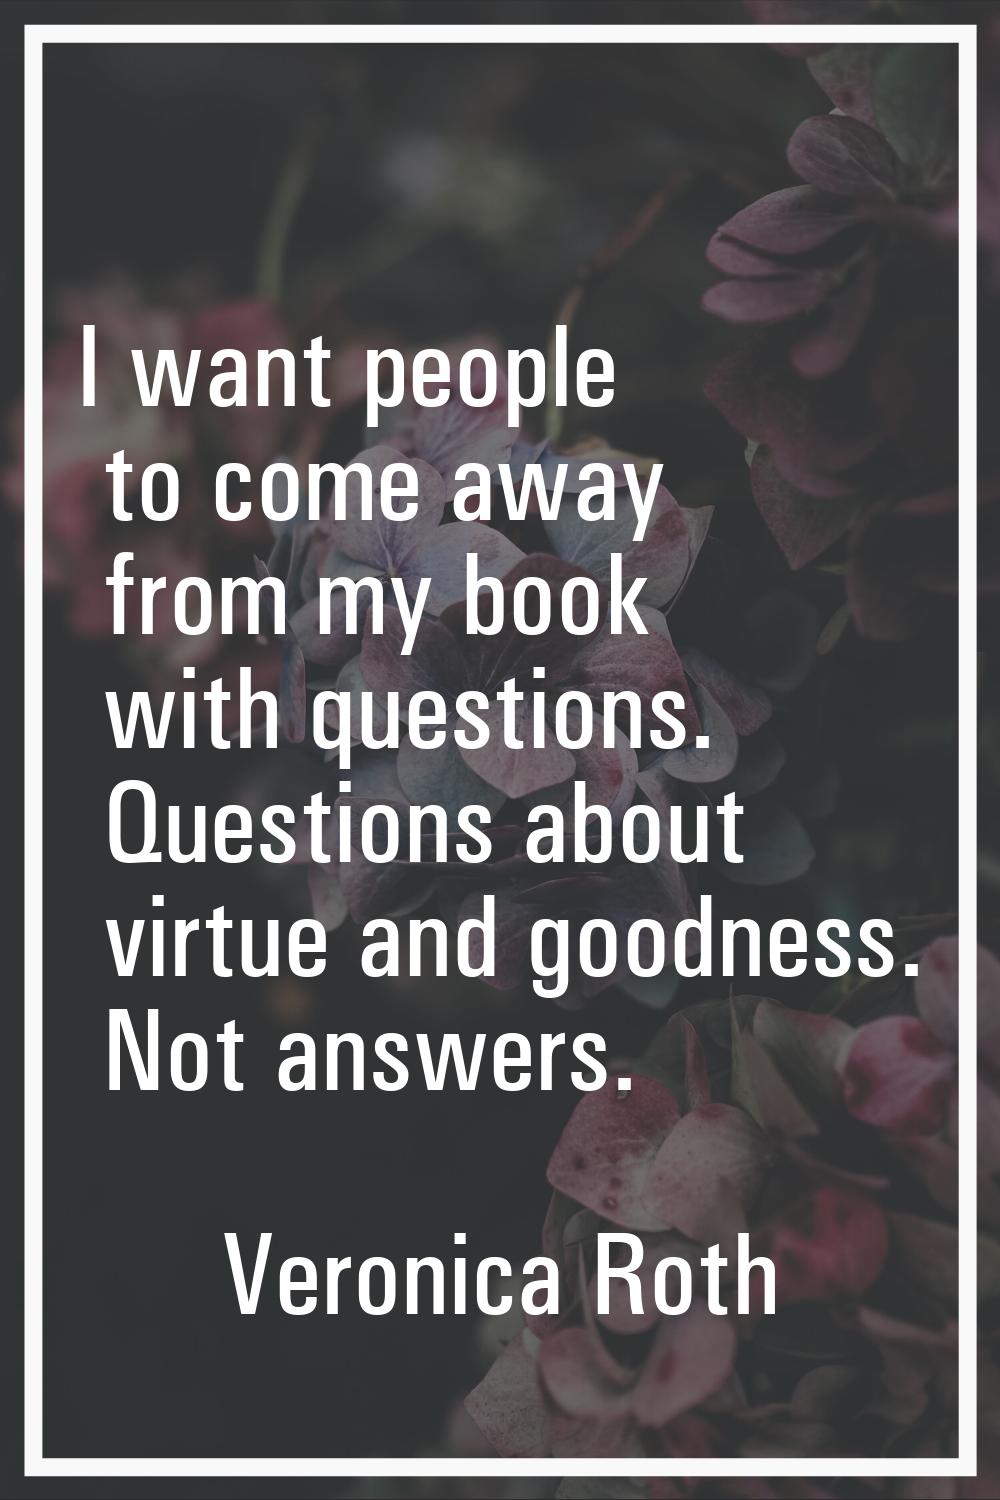 I want people to come away from my book with questions. Questions about virtue and goodness. Not an